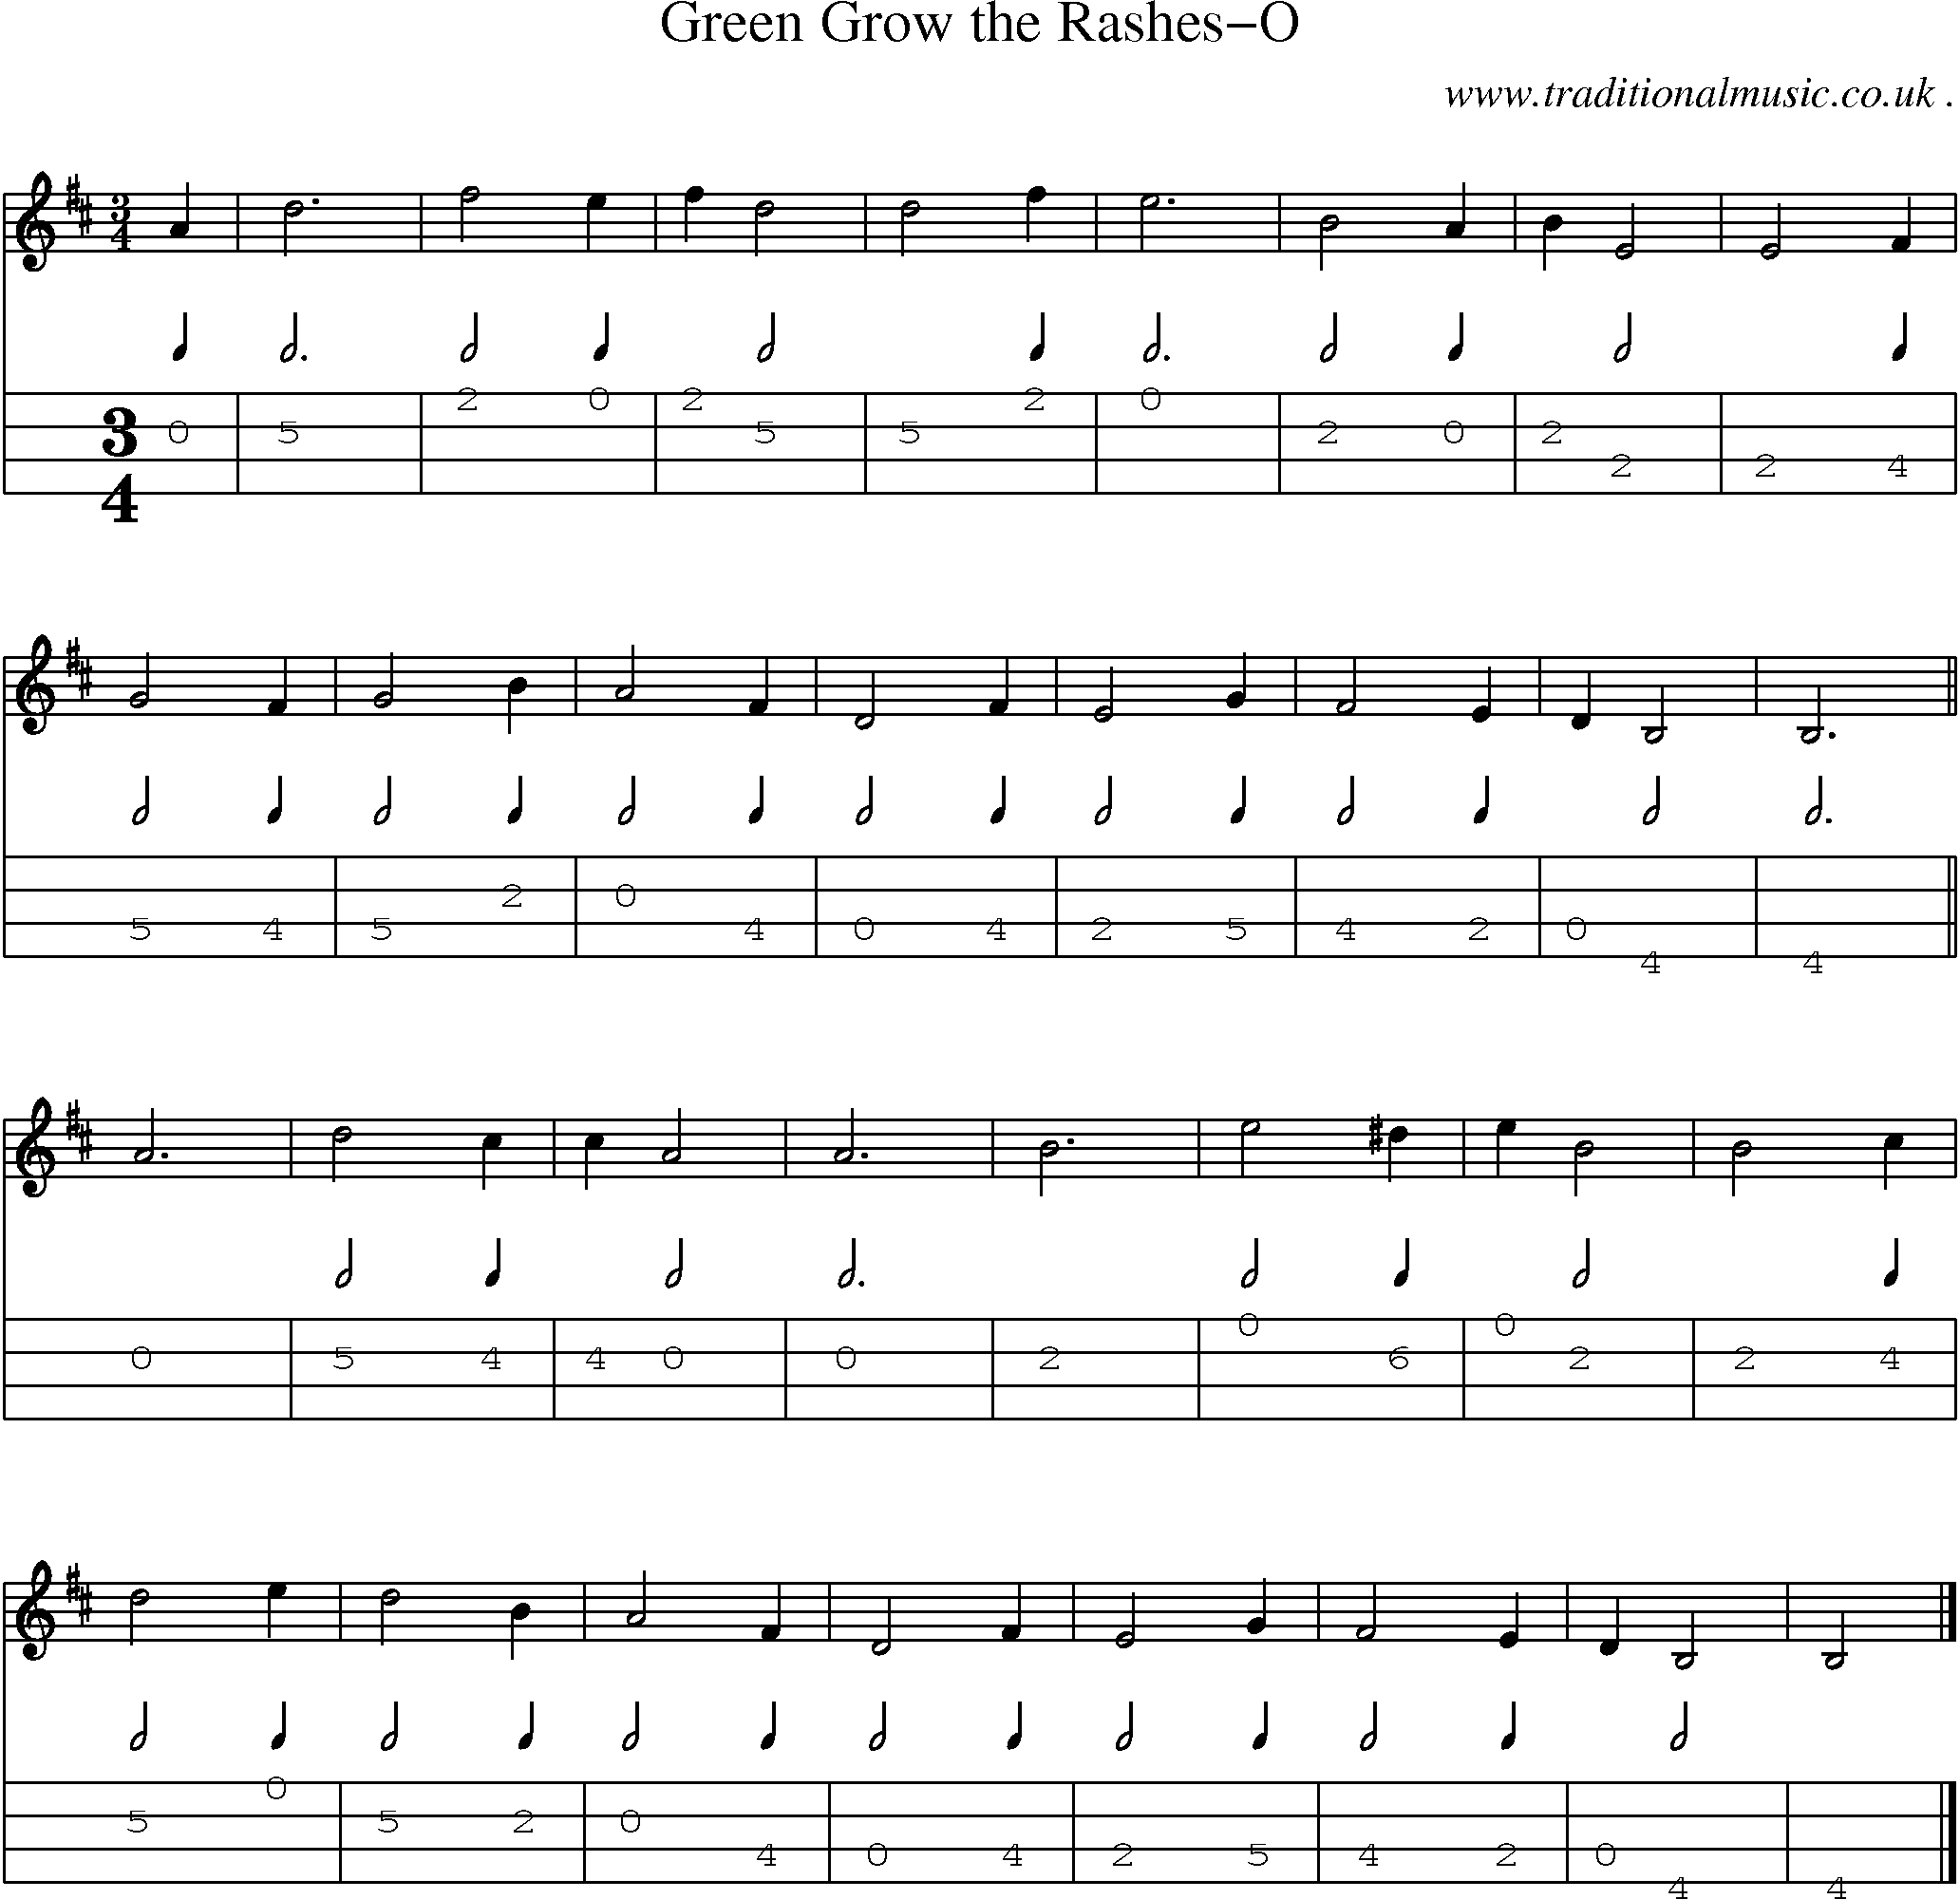 Sheet-music  score, Chords and Mandolin Tabs for Green Grow The Rashes-o